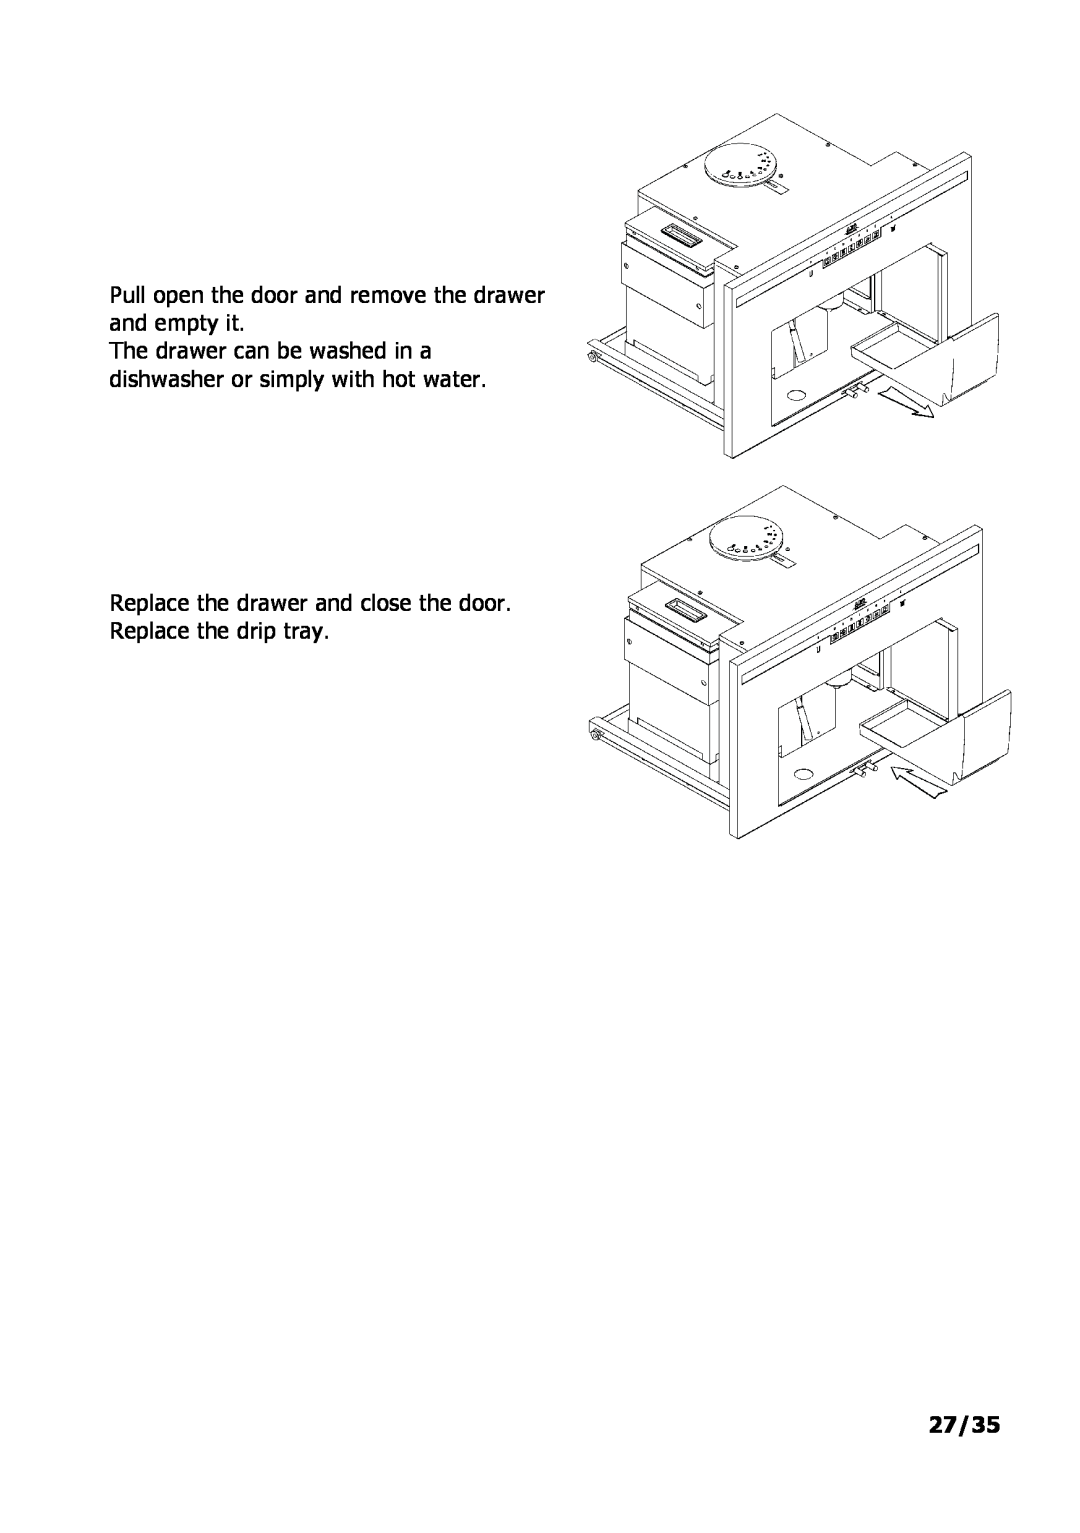 Electrolux PE 9038-m fww installation instructions Pull open the door and remove the drawer and empty it, 27/35 